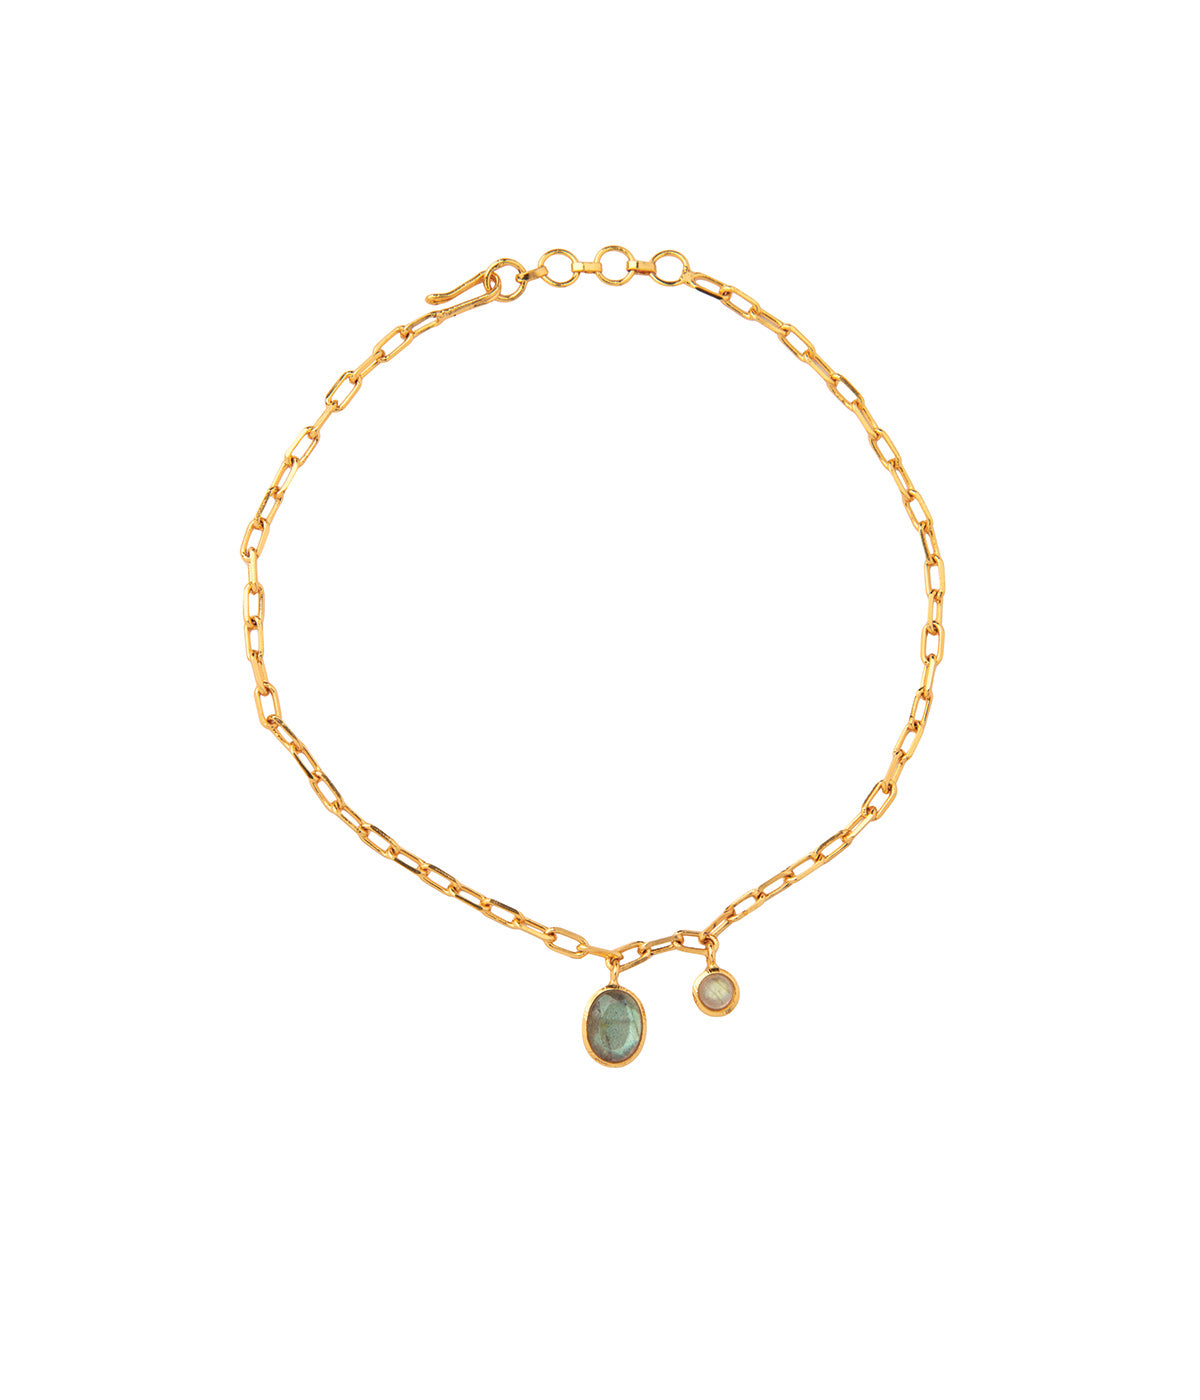 Arsia Anklet 4 gms With Exquisite Stones 18k Gold Plated On Brass - ZEWAR Jewelry